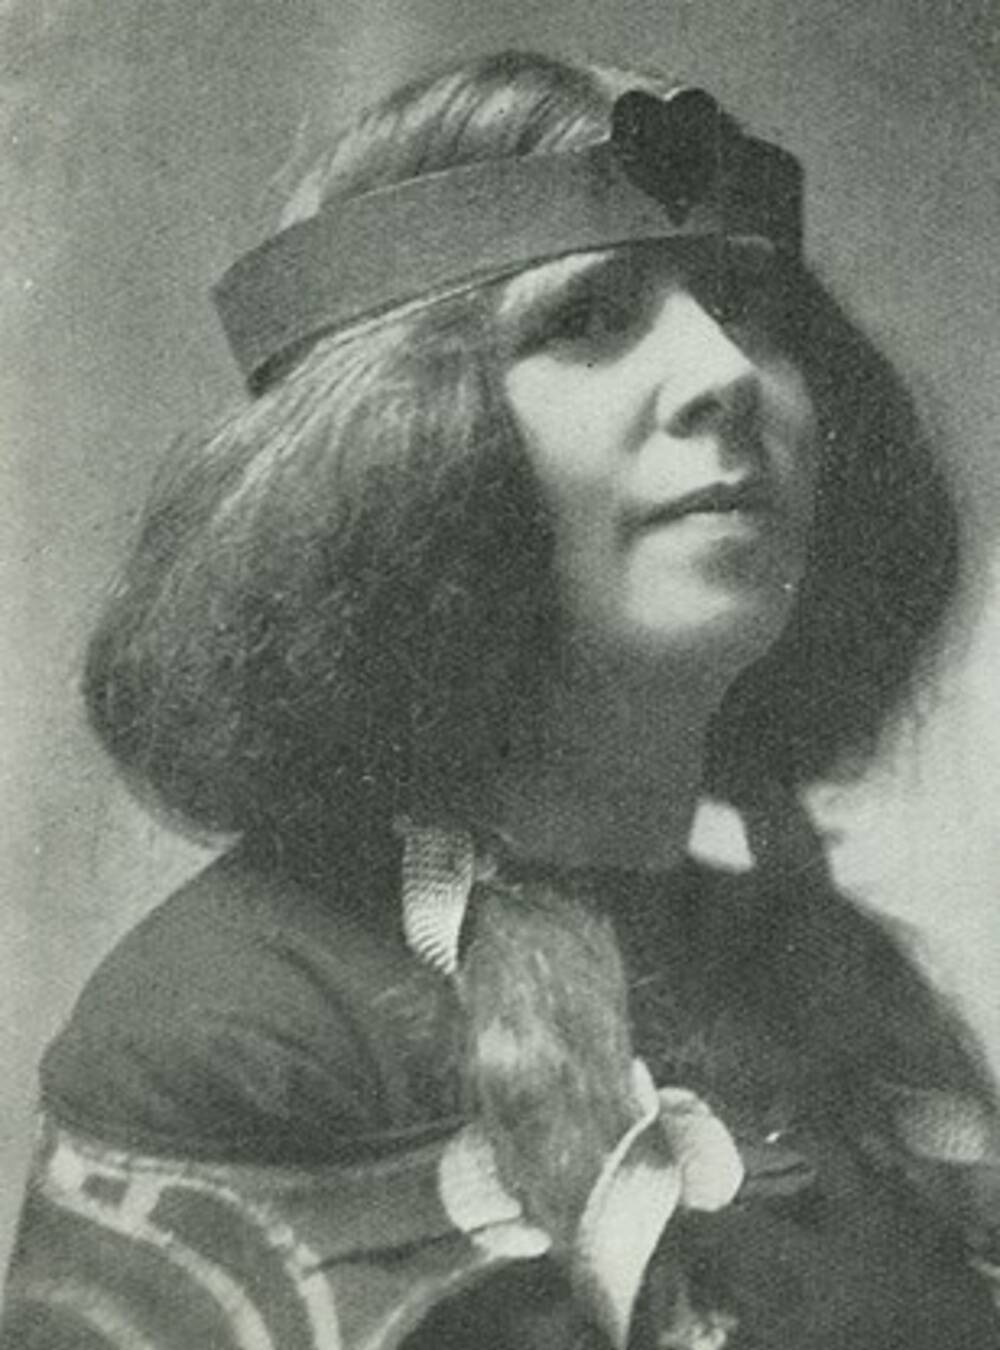 A black and white photograph of a young woman. She wears a headband with a heart at the front over her long voluminous hair. She also appears to be wearing a shawl over her dark top.